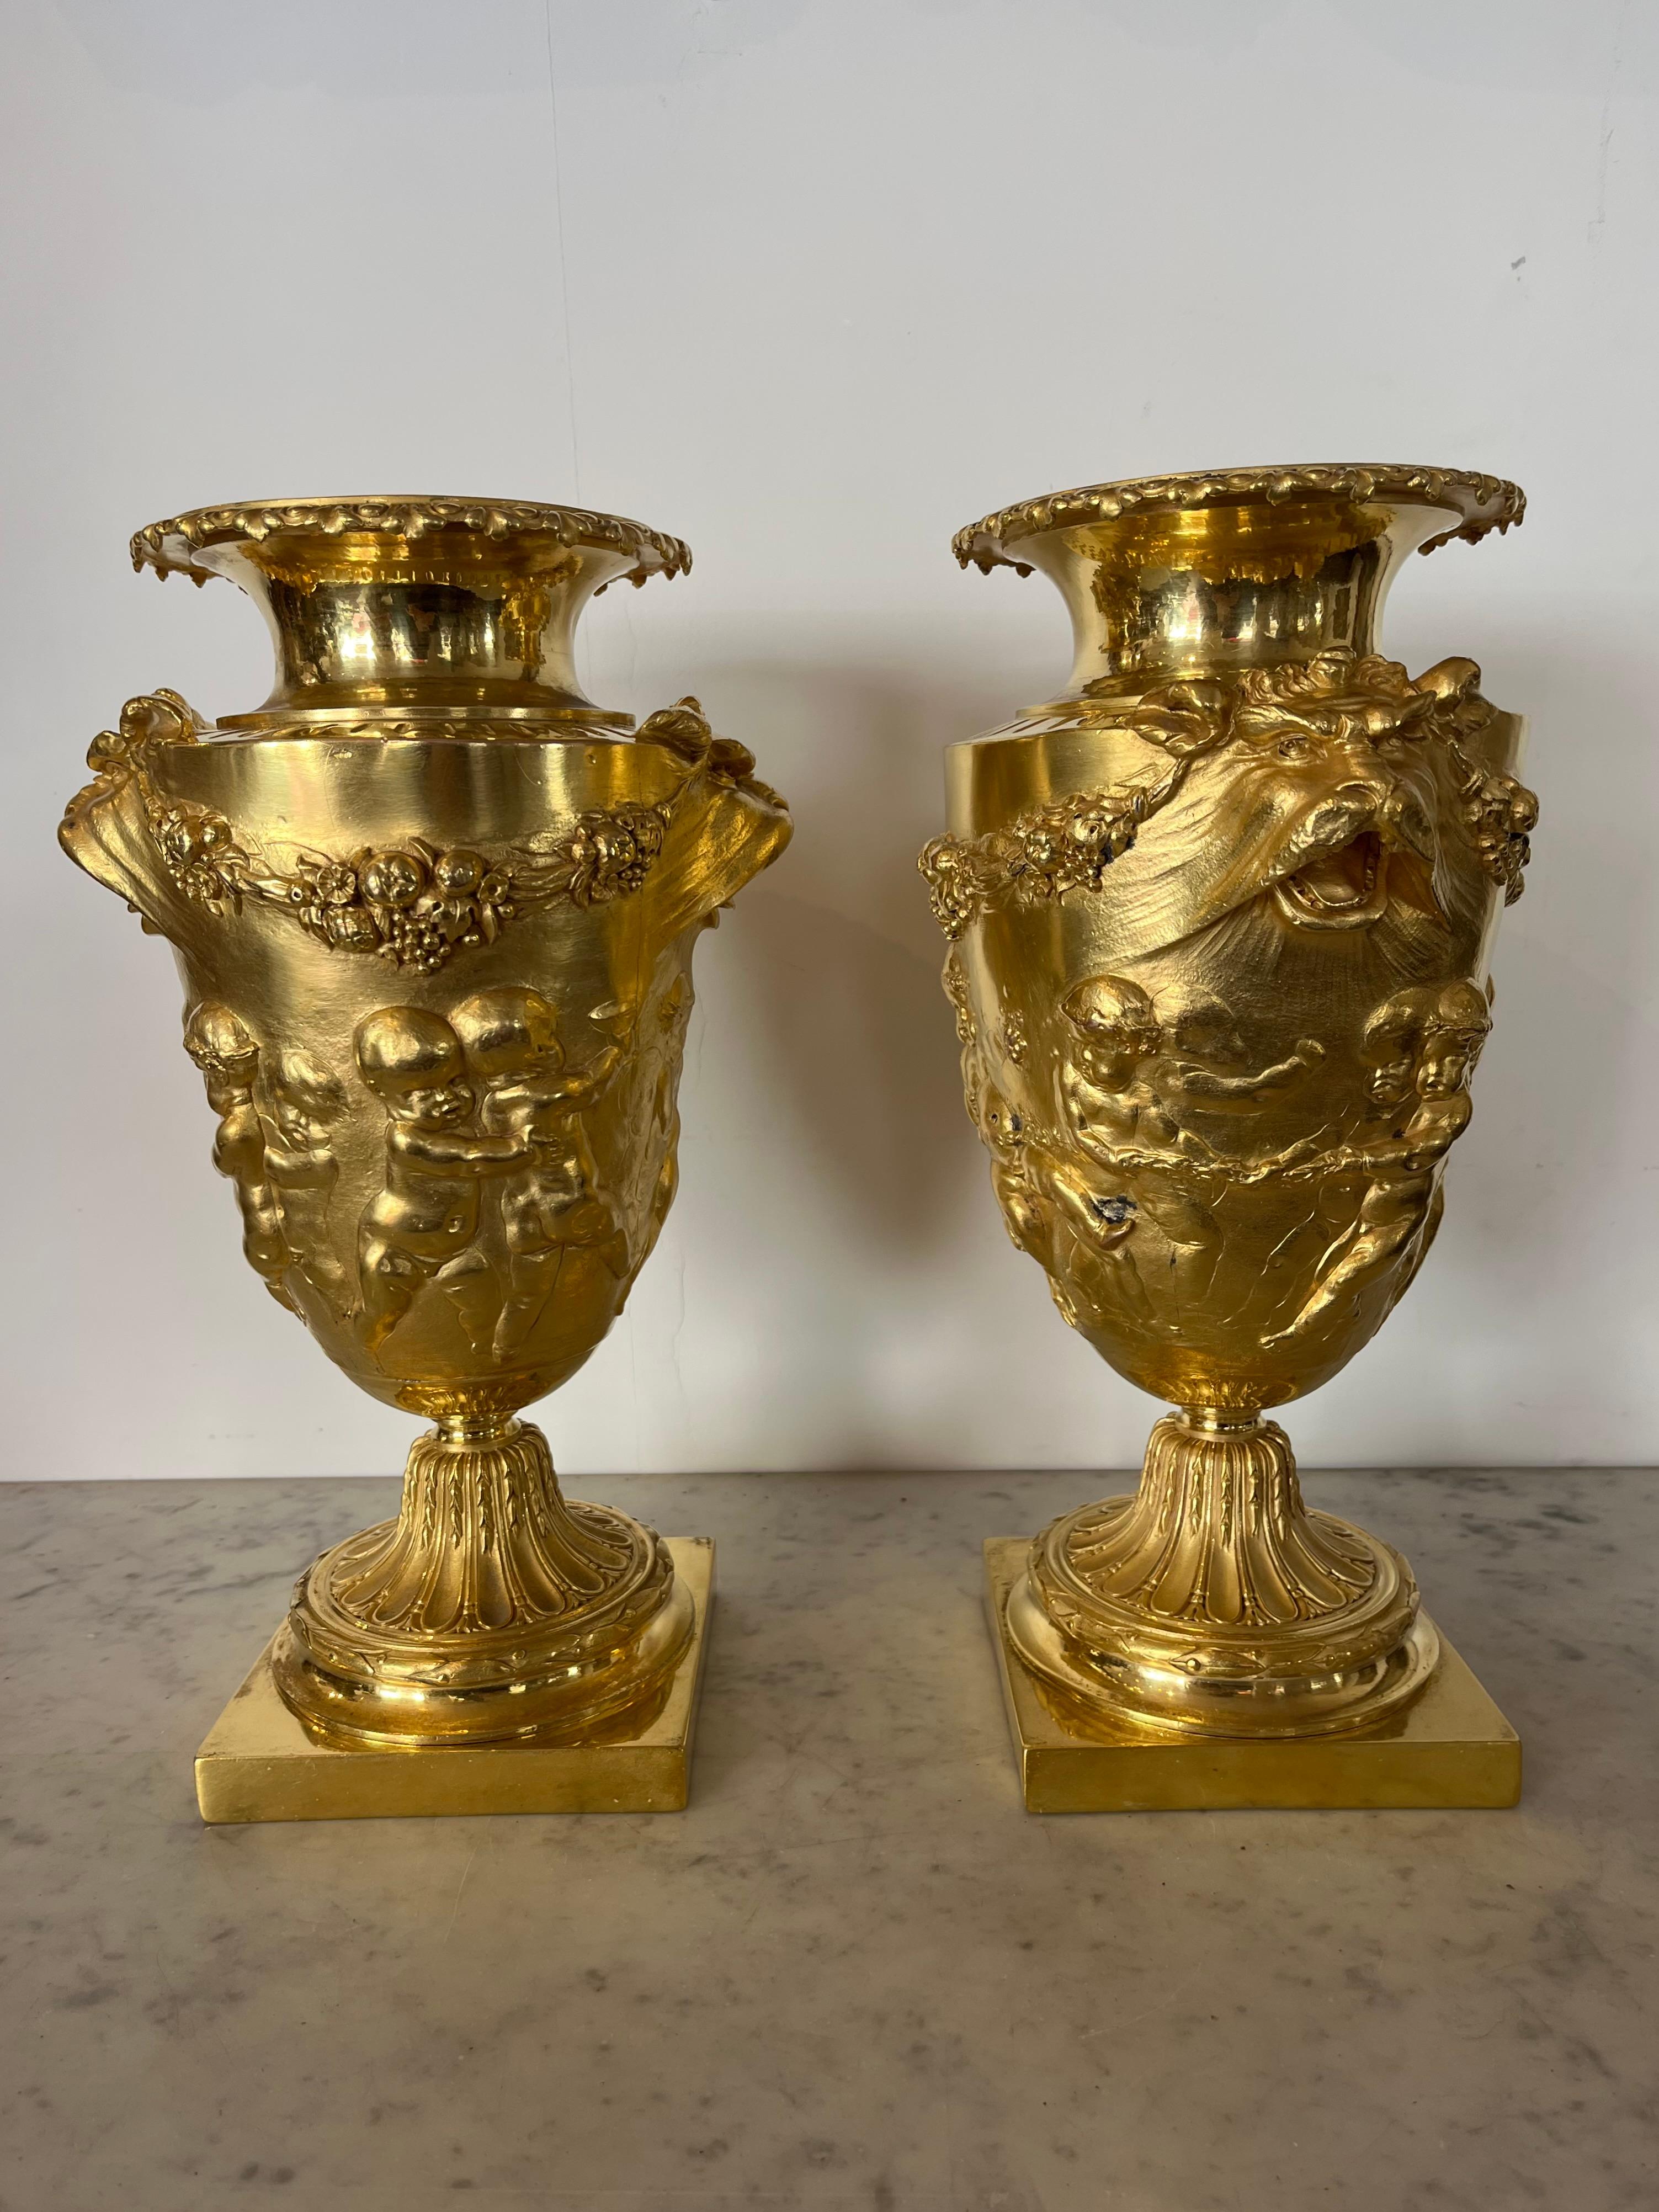 French Pair Of Urns / Cassolettes - Gilt Bronze - (after Clodion) - France - 19th Centu For Sale